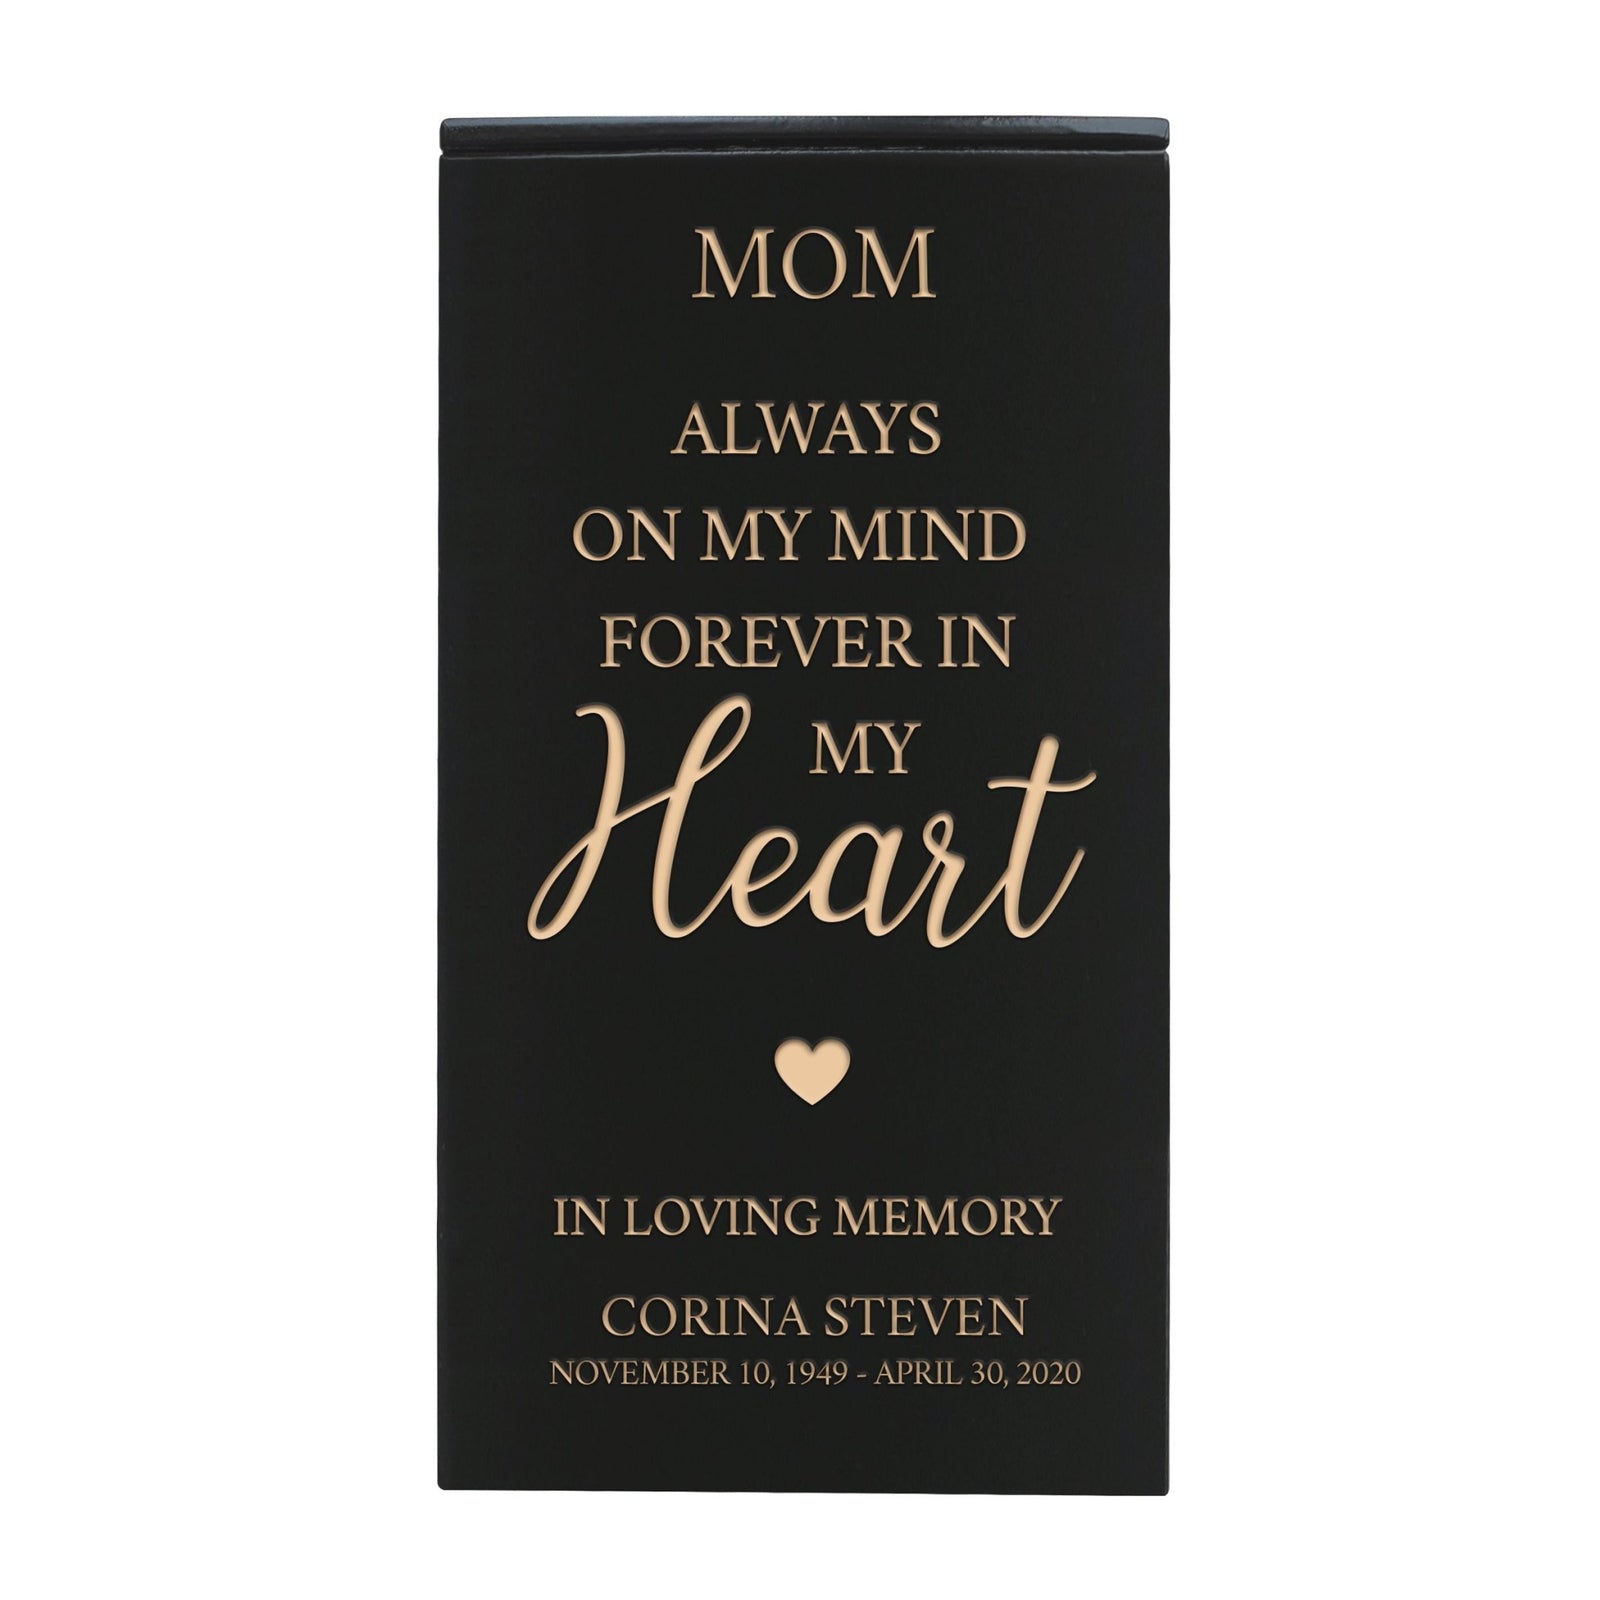 Custom Engraved Memorial Cremation Keepsake Urn Box holds 100 cu in of Ashes in - Mom, Always On My Mind - LifeSong Milestones